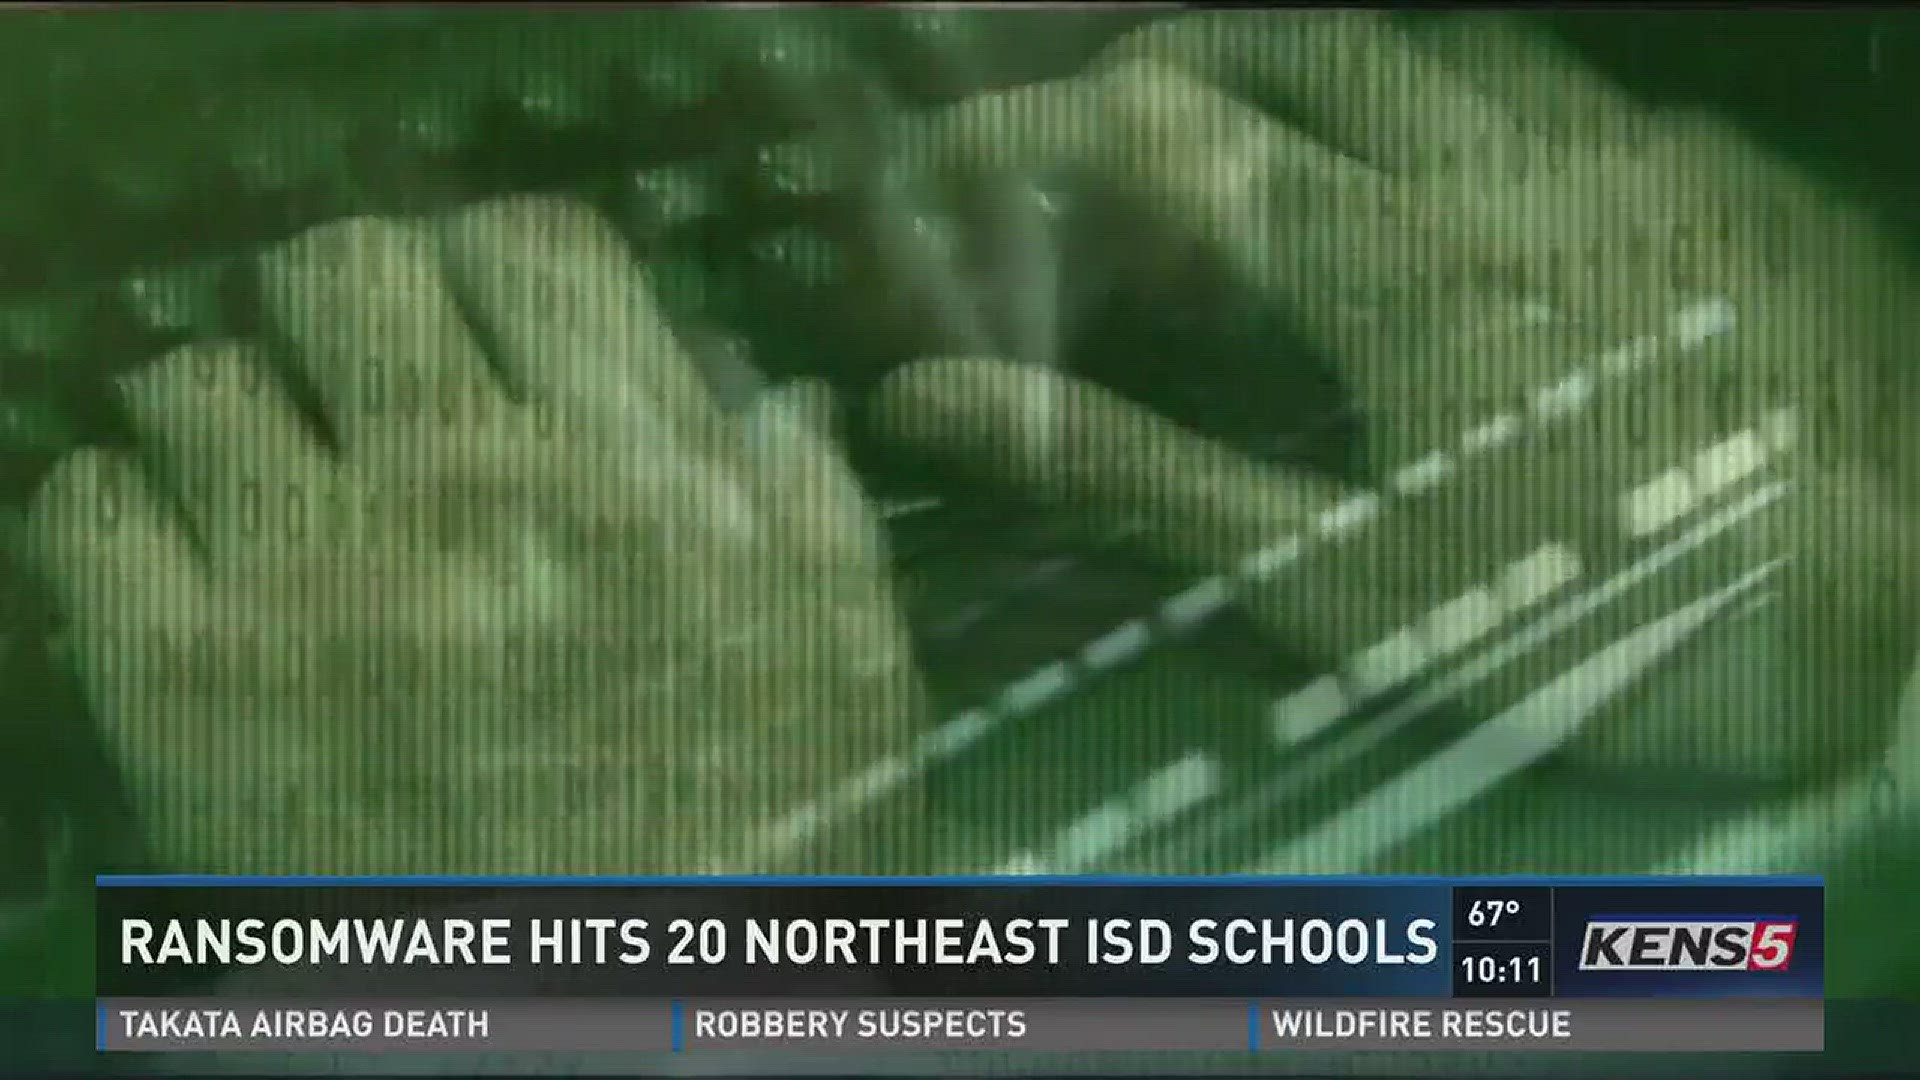 Ransomware hits 20 North East ISD schools